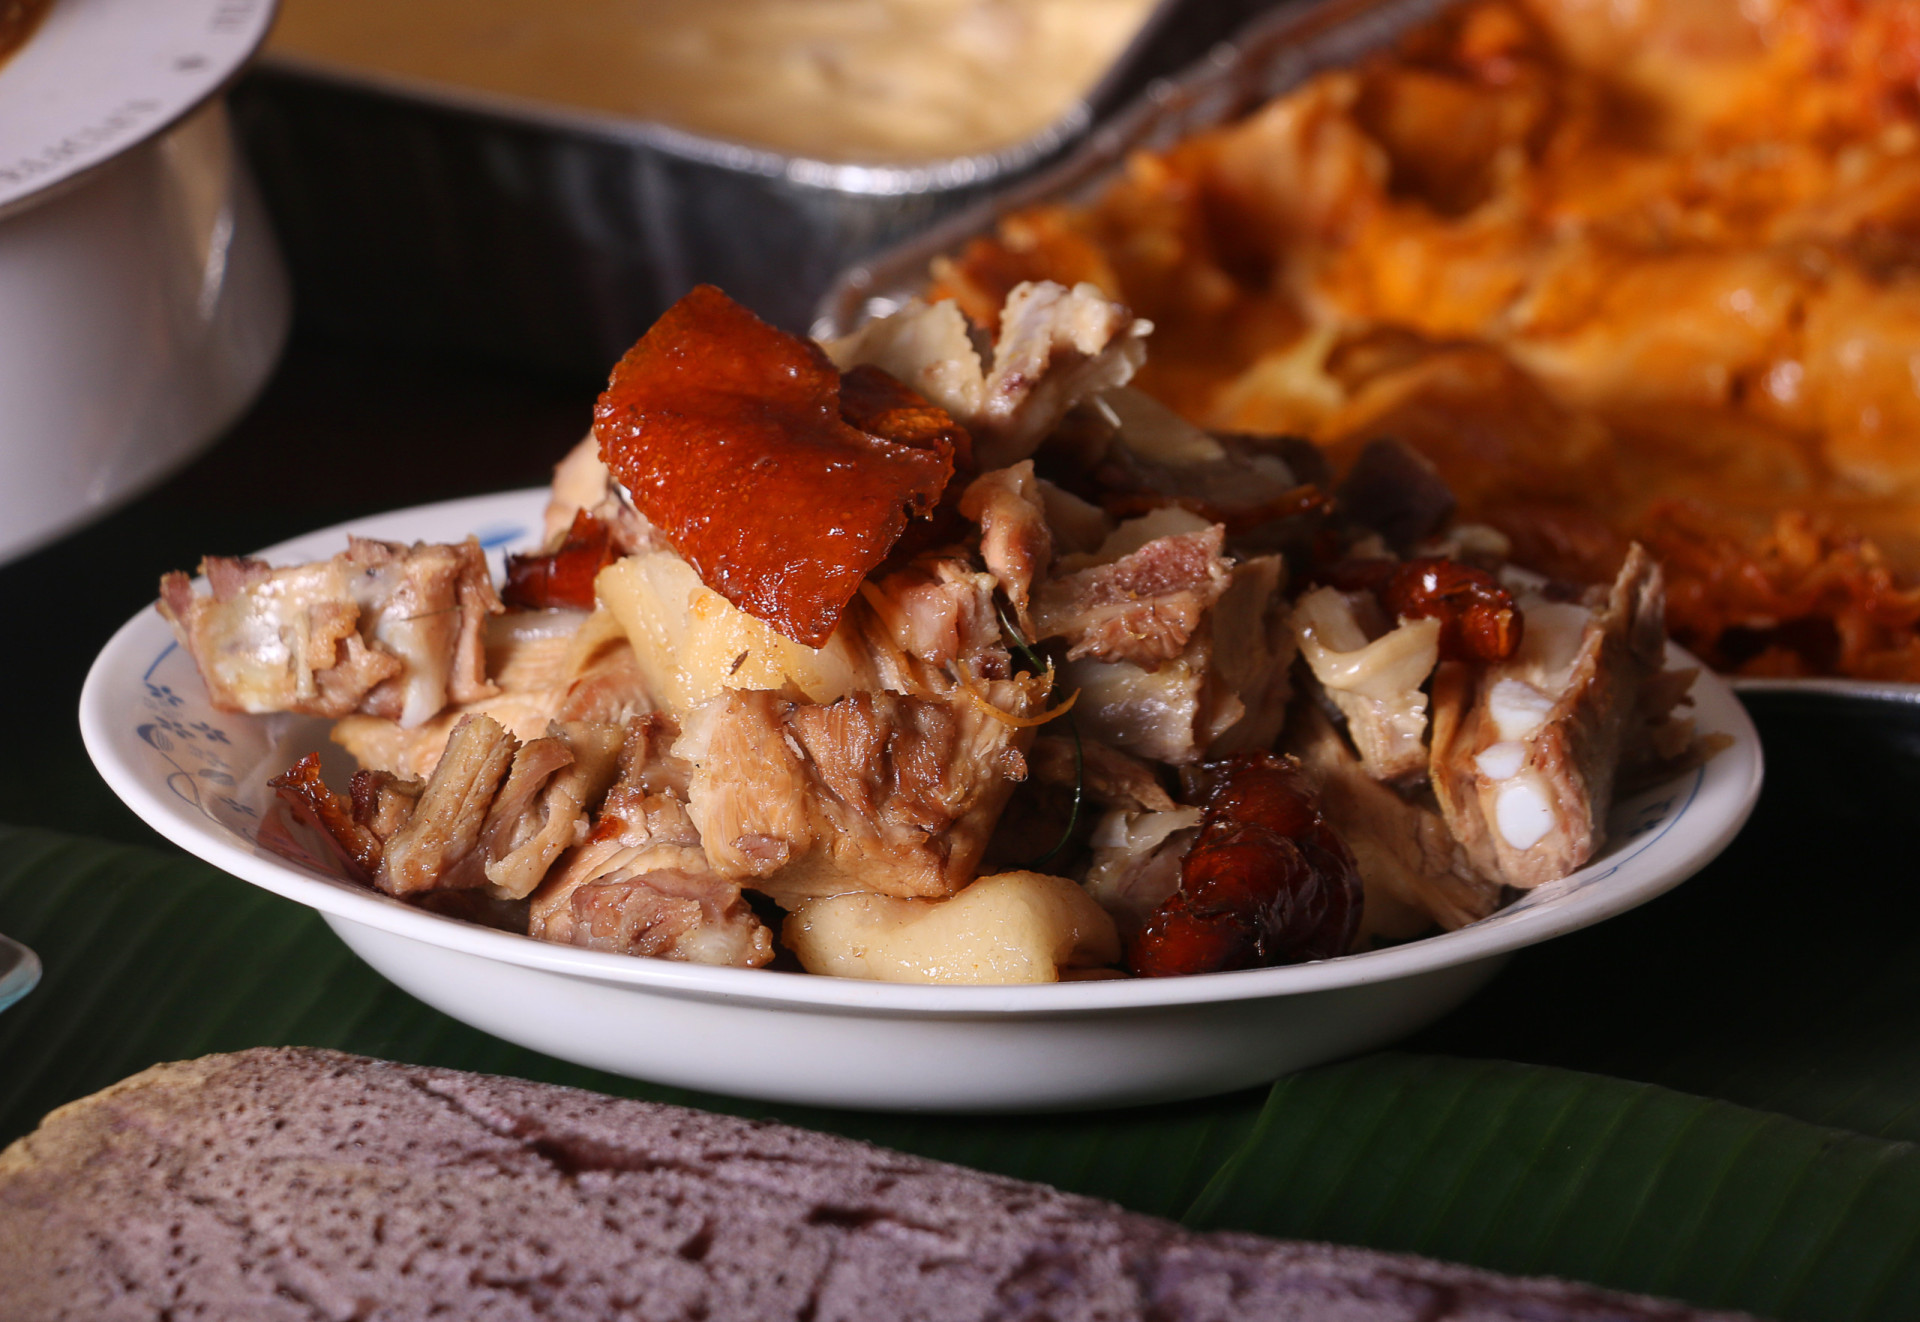 <p>If you want to have a true Puerto Rican gastronomical experience, take a trip to Guavate in Puerto Rico’s mountainous region. Known as the Ruta del Lechón (Suckling Pig Route), the area is every pork lover’s dream come true.</p><p>You may also like:<a href="https://www.starsinsider.com/n/421818?utm_source=msn.com&utm_medium=display&utm_campaign=referral_description&utm_content=173131en-us"> The best ways to reduce your blood pressure</a></p>